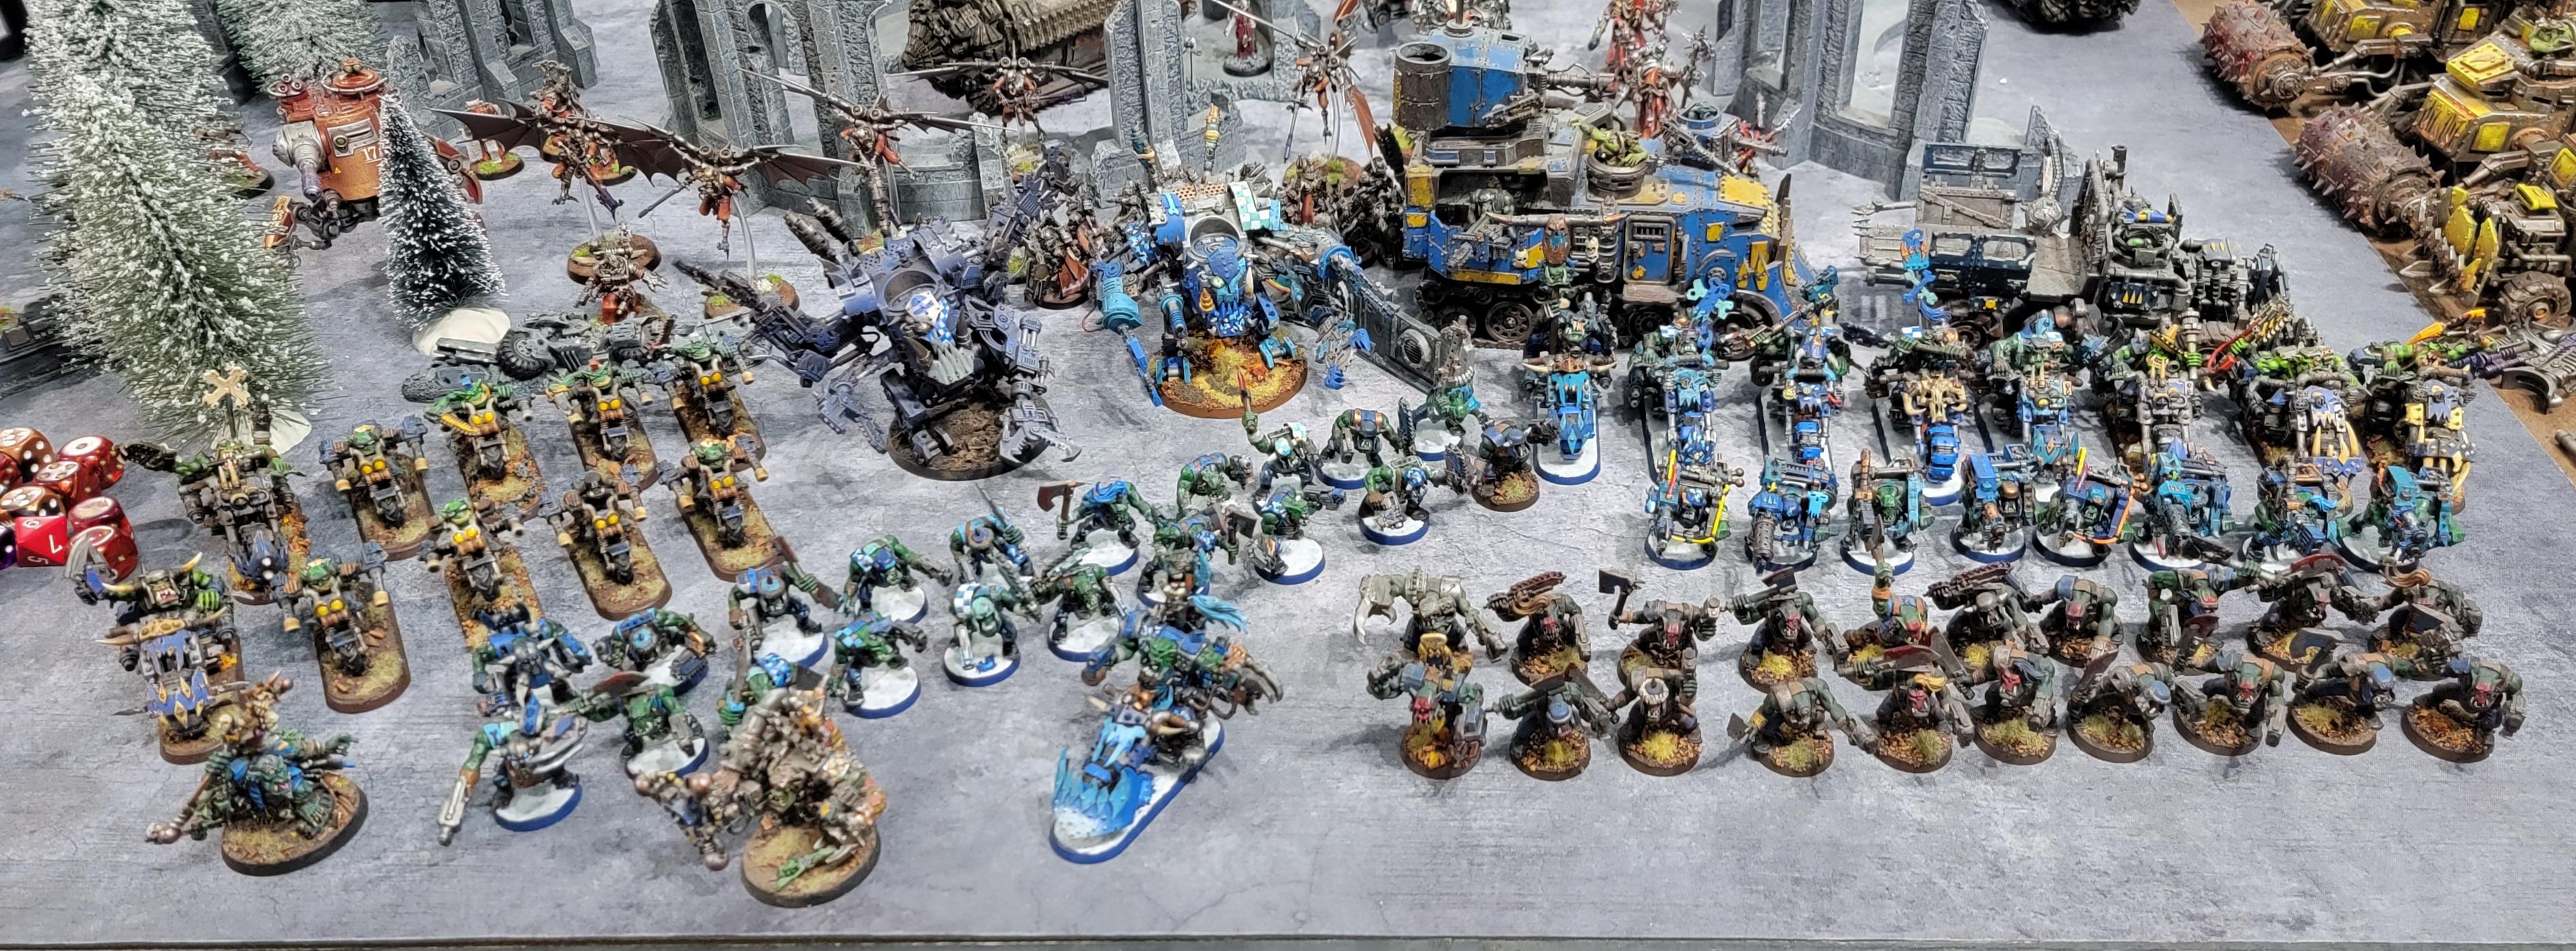 Army, Orks, Blue Moons